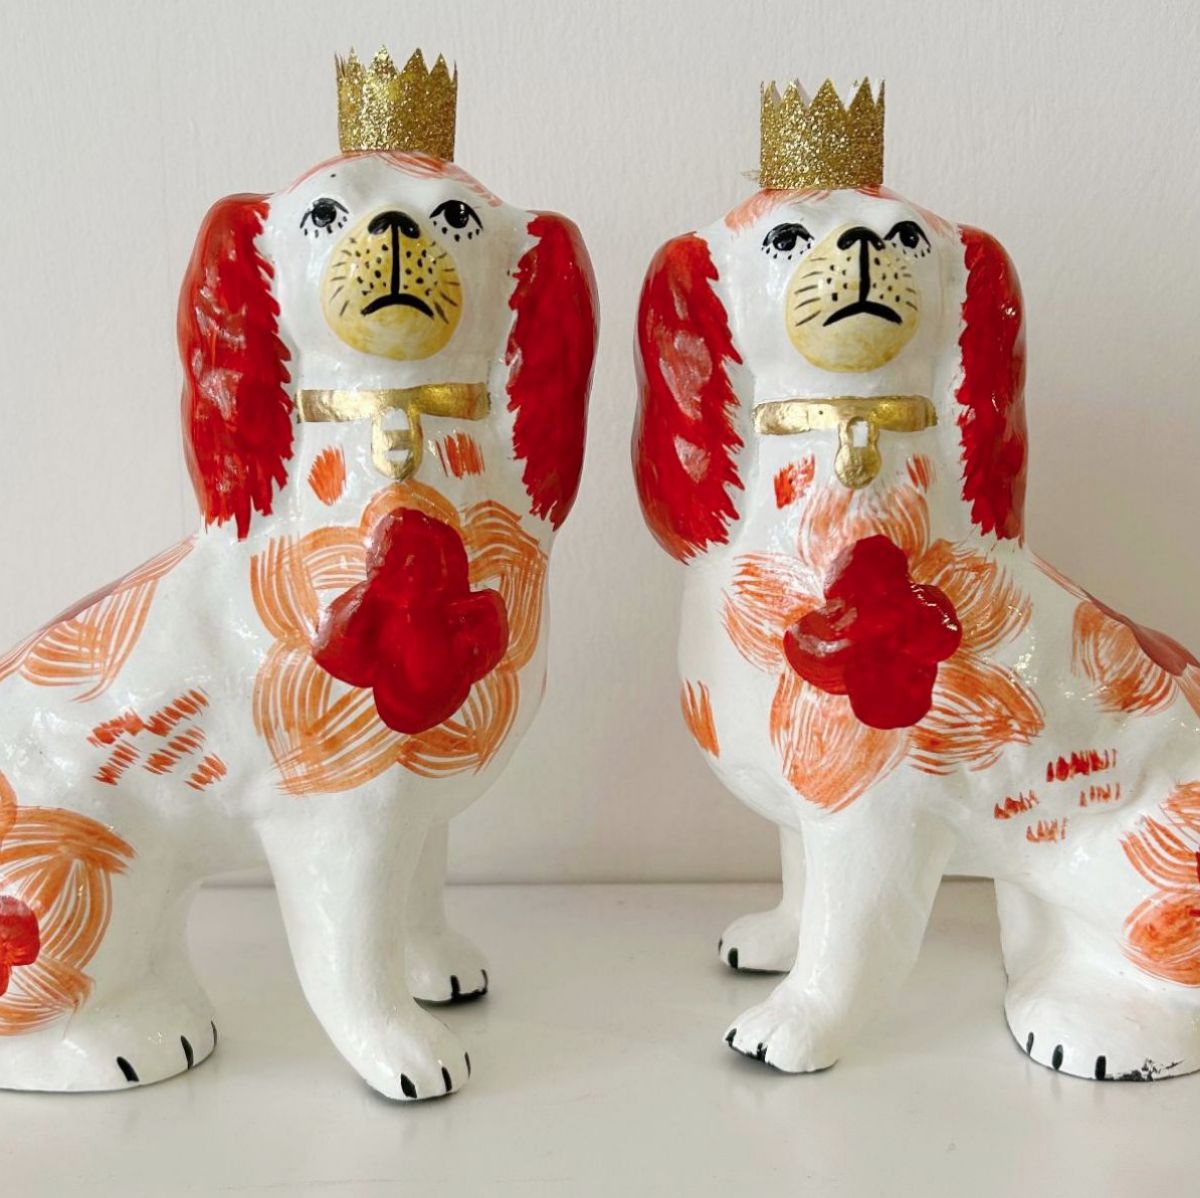 King Charles Spaniel Paper Mache Decorations wearing gold crowns